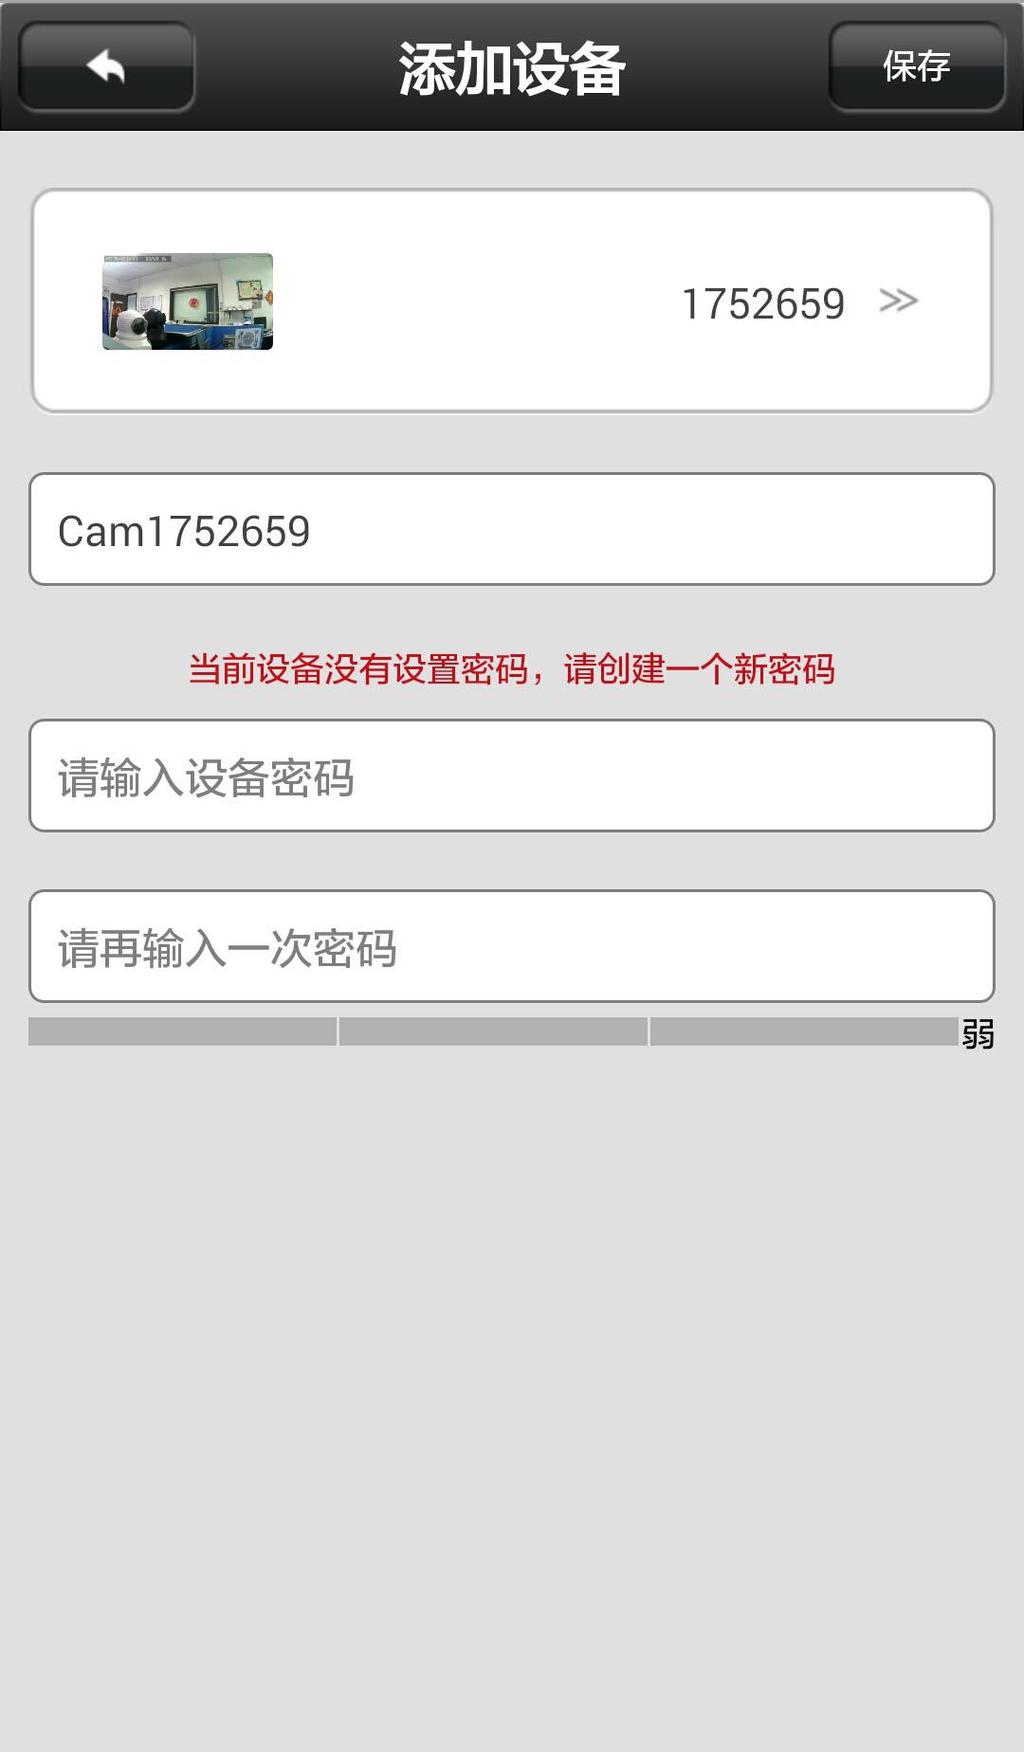 After connect towifi Successfully, operate as the tips to setting the password, and click done button 6.